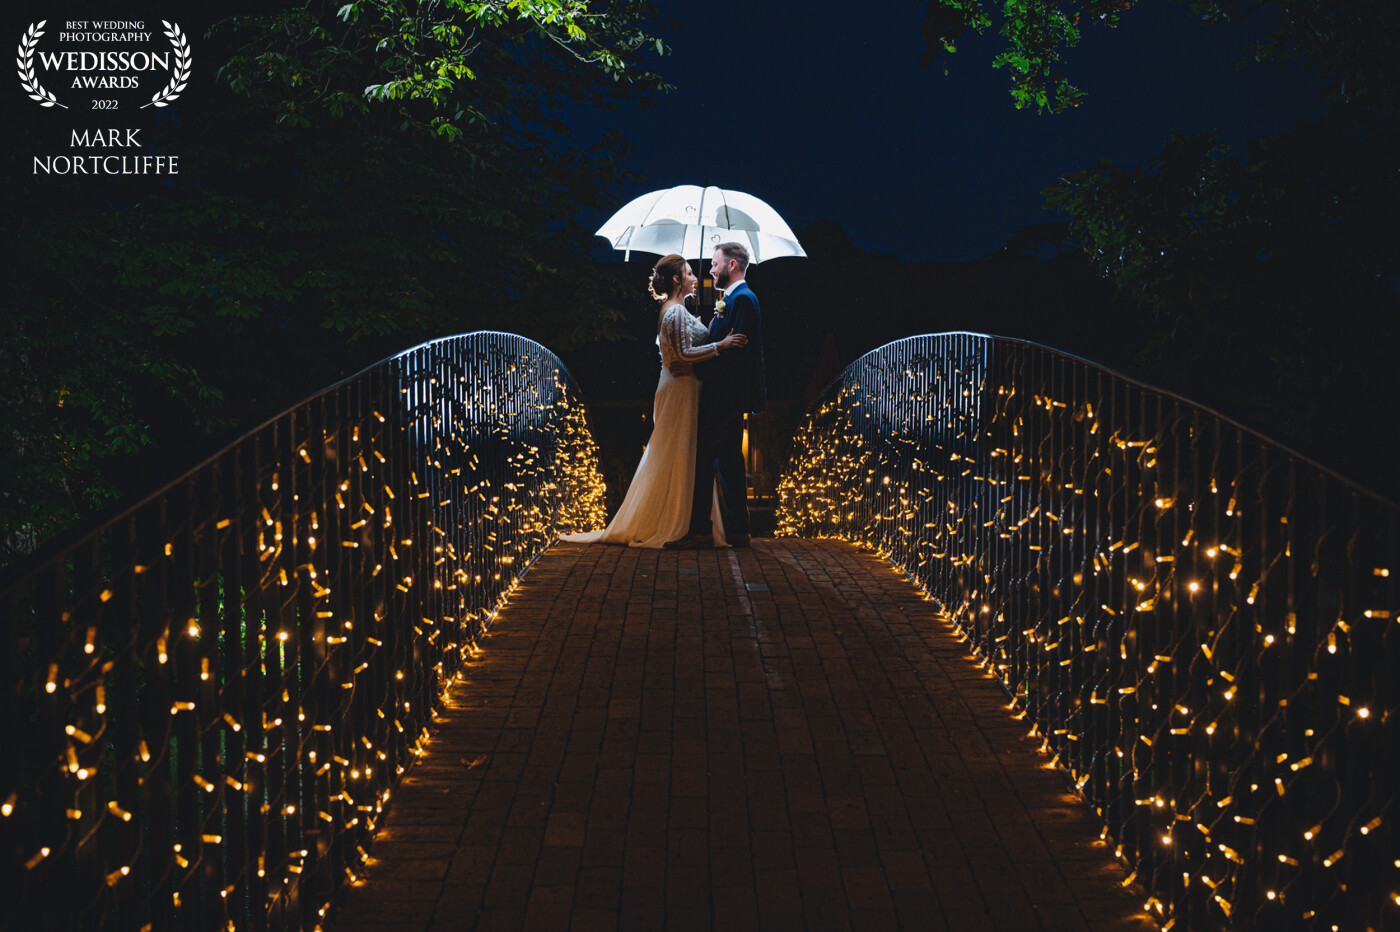 Amazing wedding of Tonya & Jamie at the equally amazing Bassmead Manor Barns - Cambridgeshire<br />
The bridge is the perfect spot to capture this image and the venue have invested heavily to make sure the setting is just right.